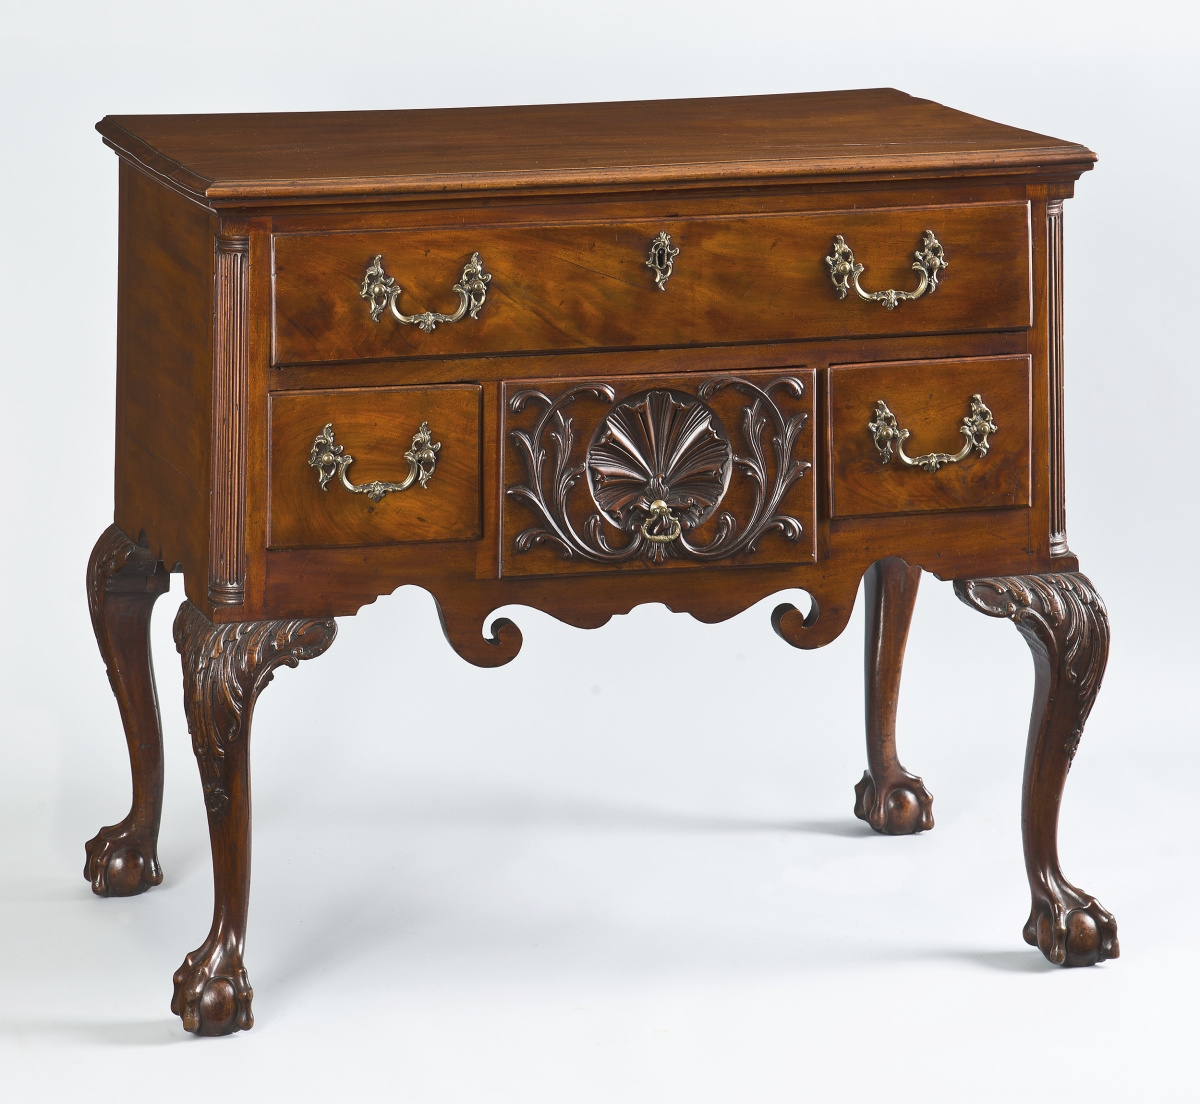 Philadelphia mahogany dressing table attributed to the workshop of cabinetmaker Benjamin Randolph, incorporating the latest fashion of fluid and robust carving attributed to the London emigre carver Hercules Courtney. This table has the finest quality of highly figured mahogany and is further ornamented by its original rococo brass hardware, a rare level of embellishment. Descended in the Wistar family of Philadelphia. Circa 1770. Philip Bradley Antiques.